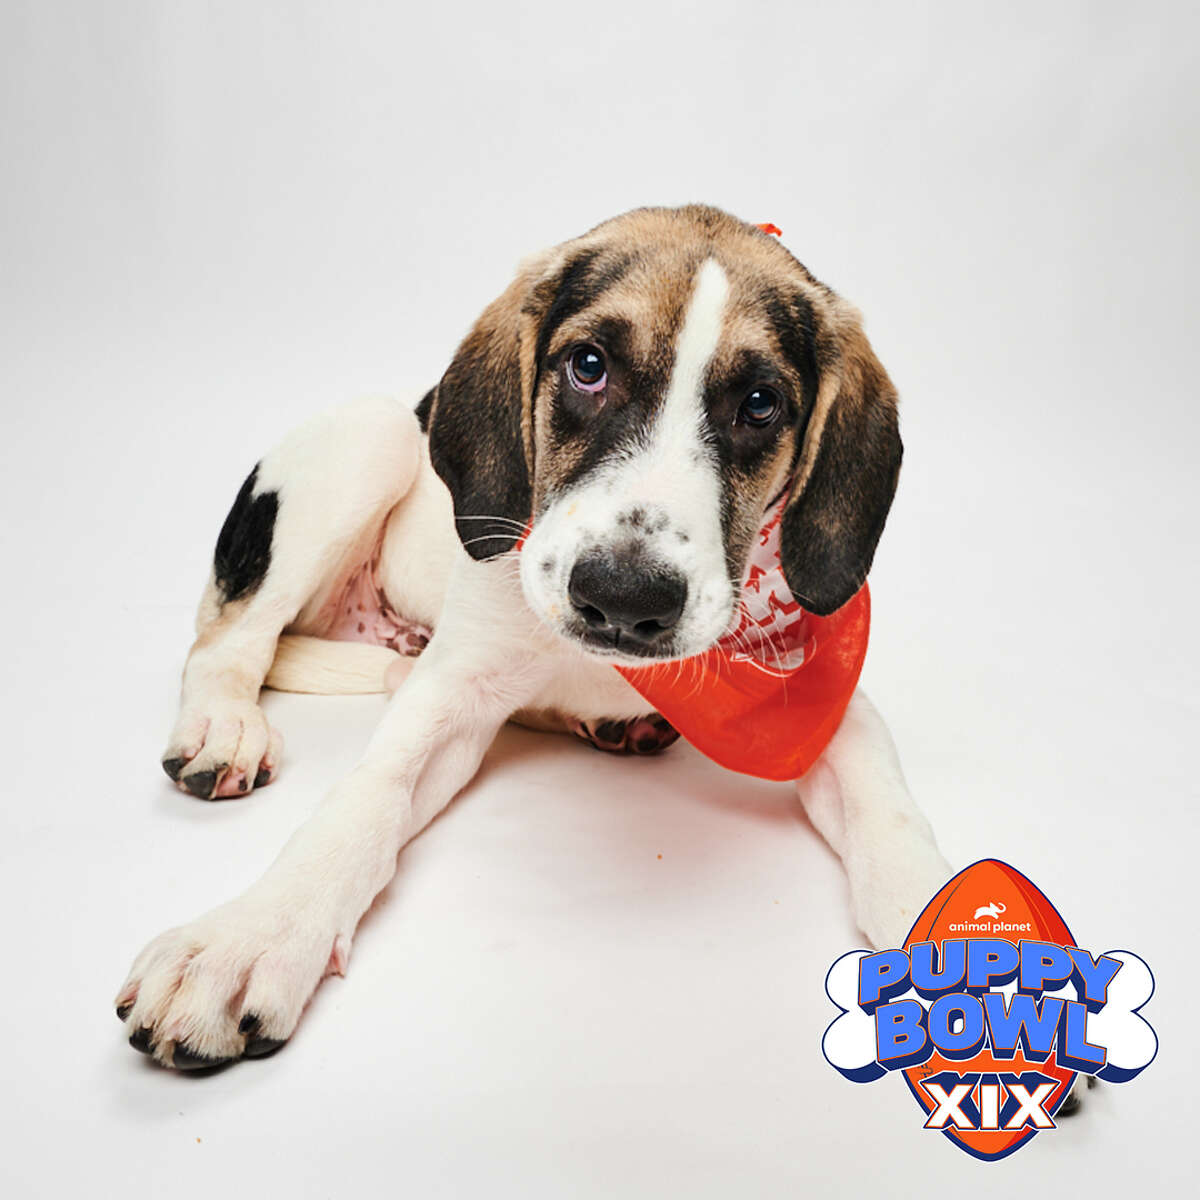 Moose from the Pack Leaders Rescue of CT will play in this year's Puppy Bowl on Sunday, Feb. 12.